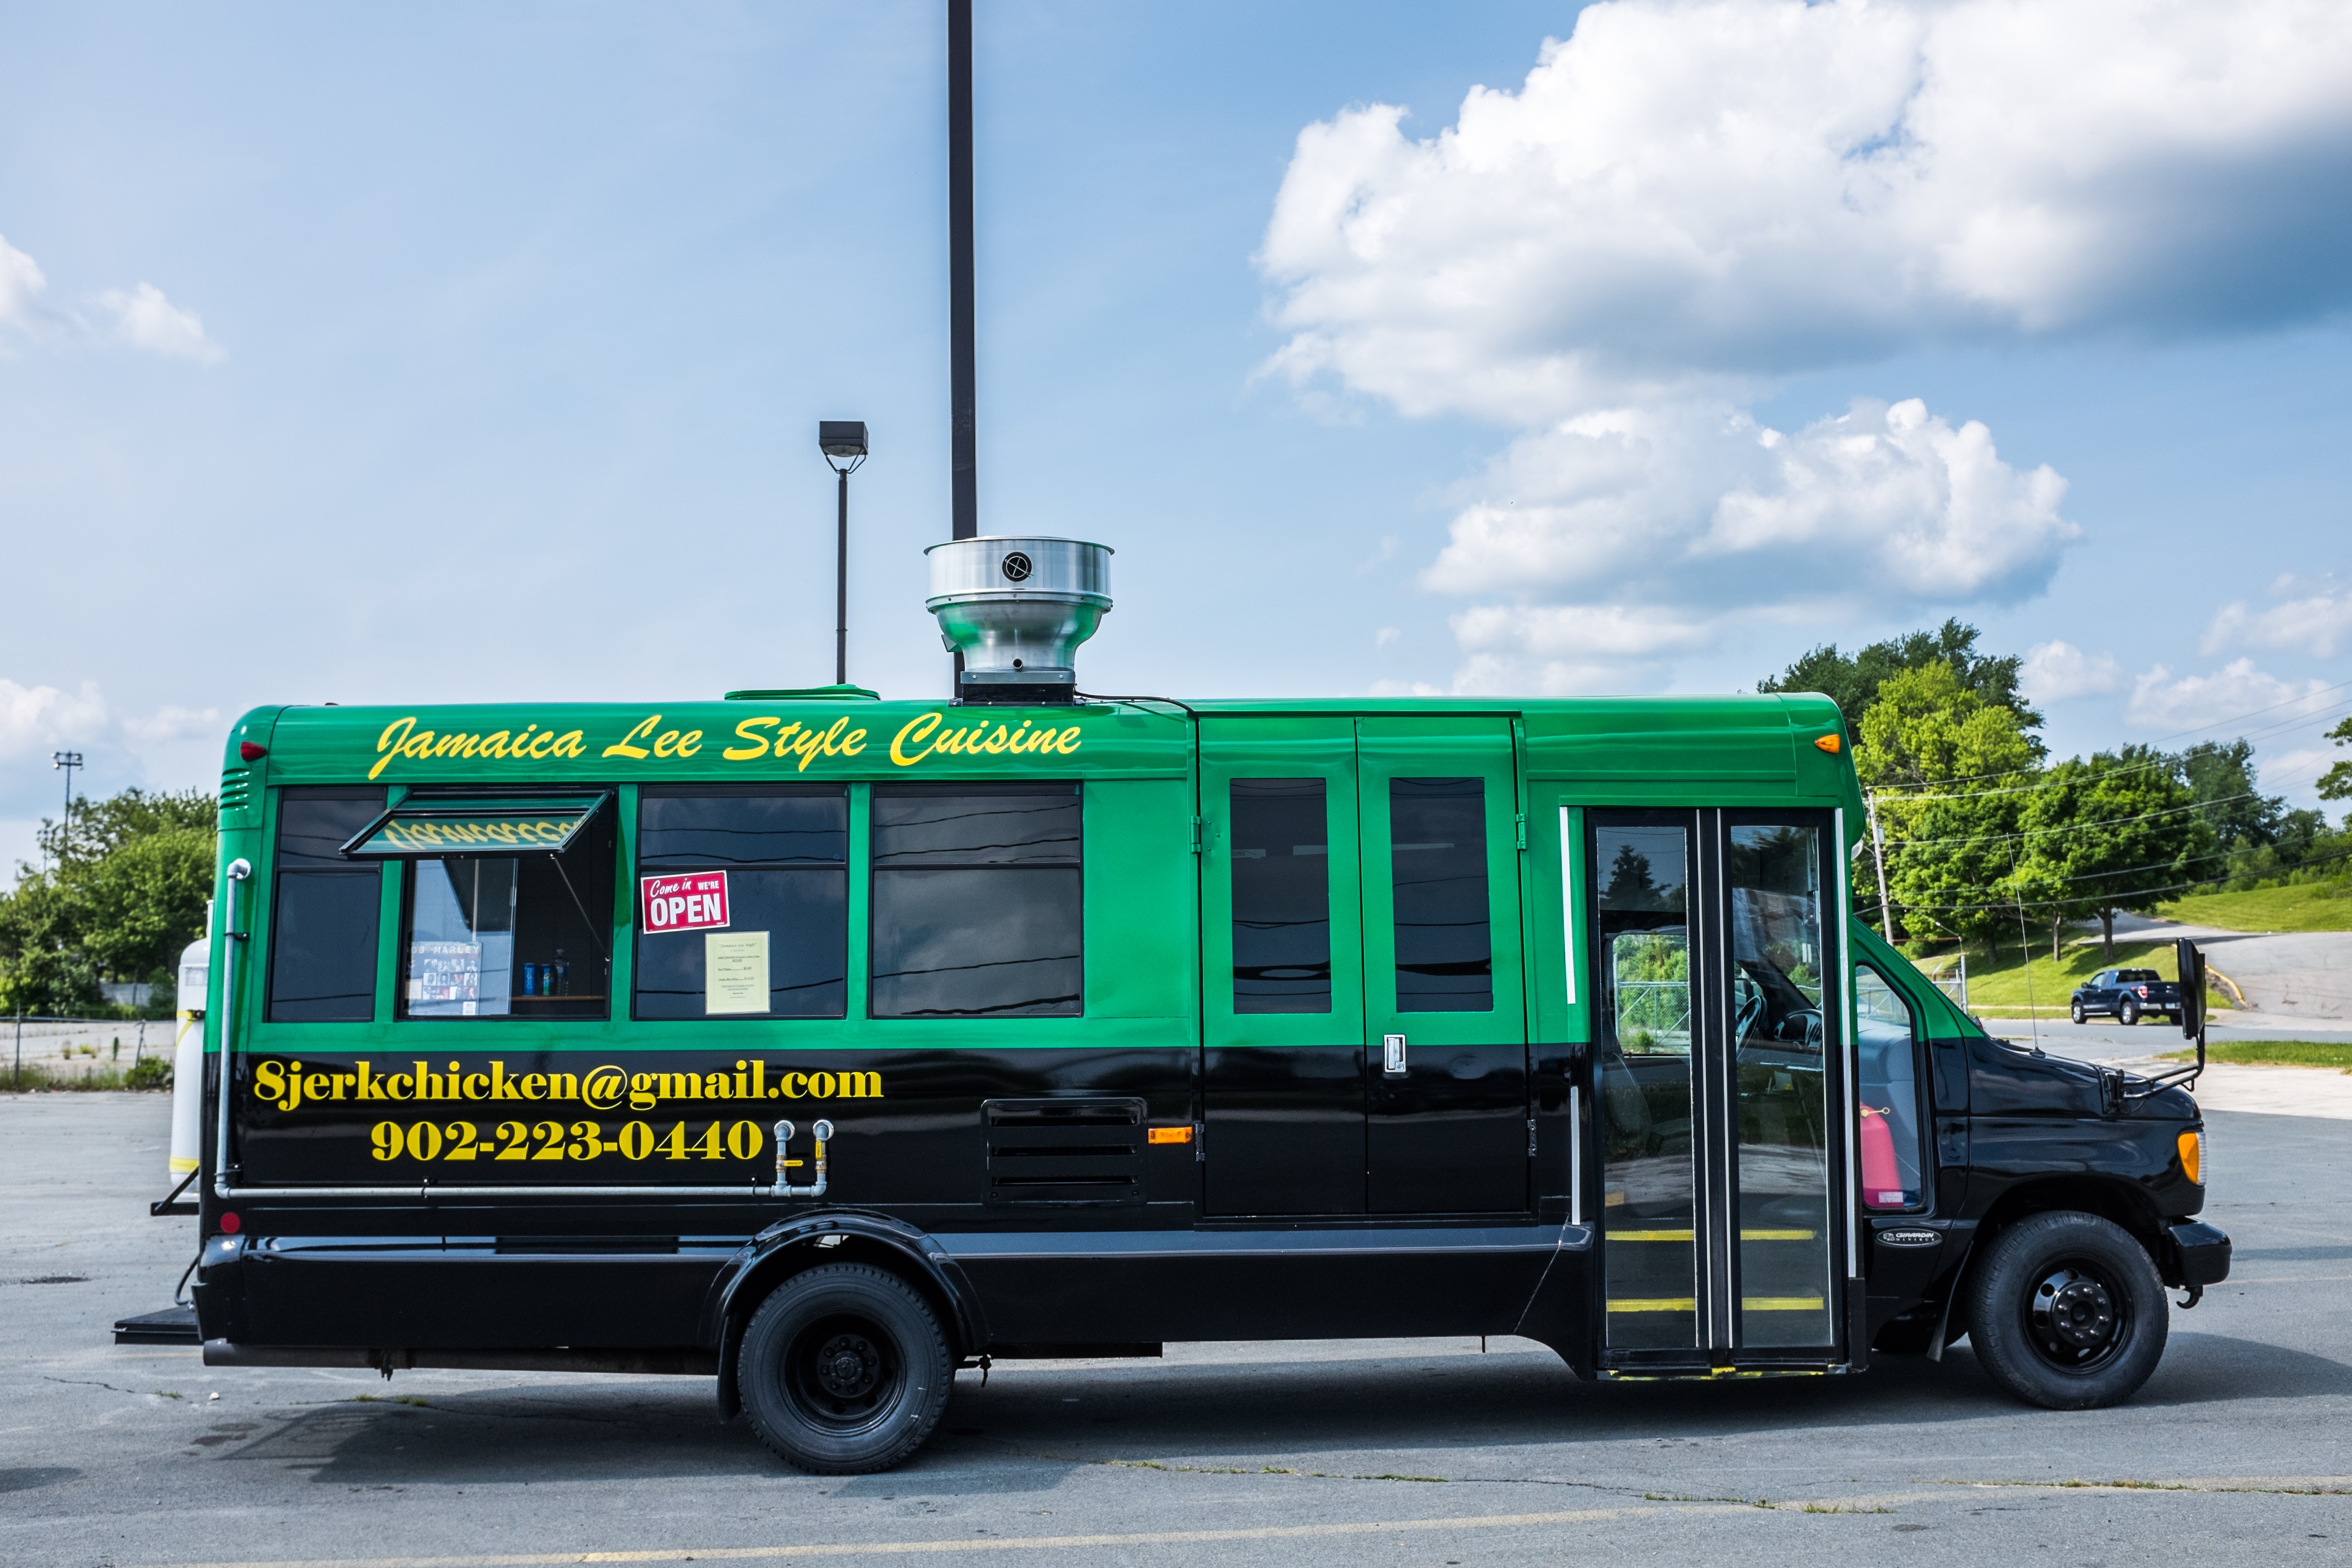 Have you tried the Jamaican food truck yet?